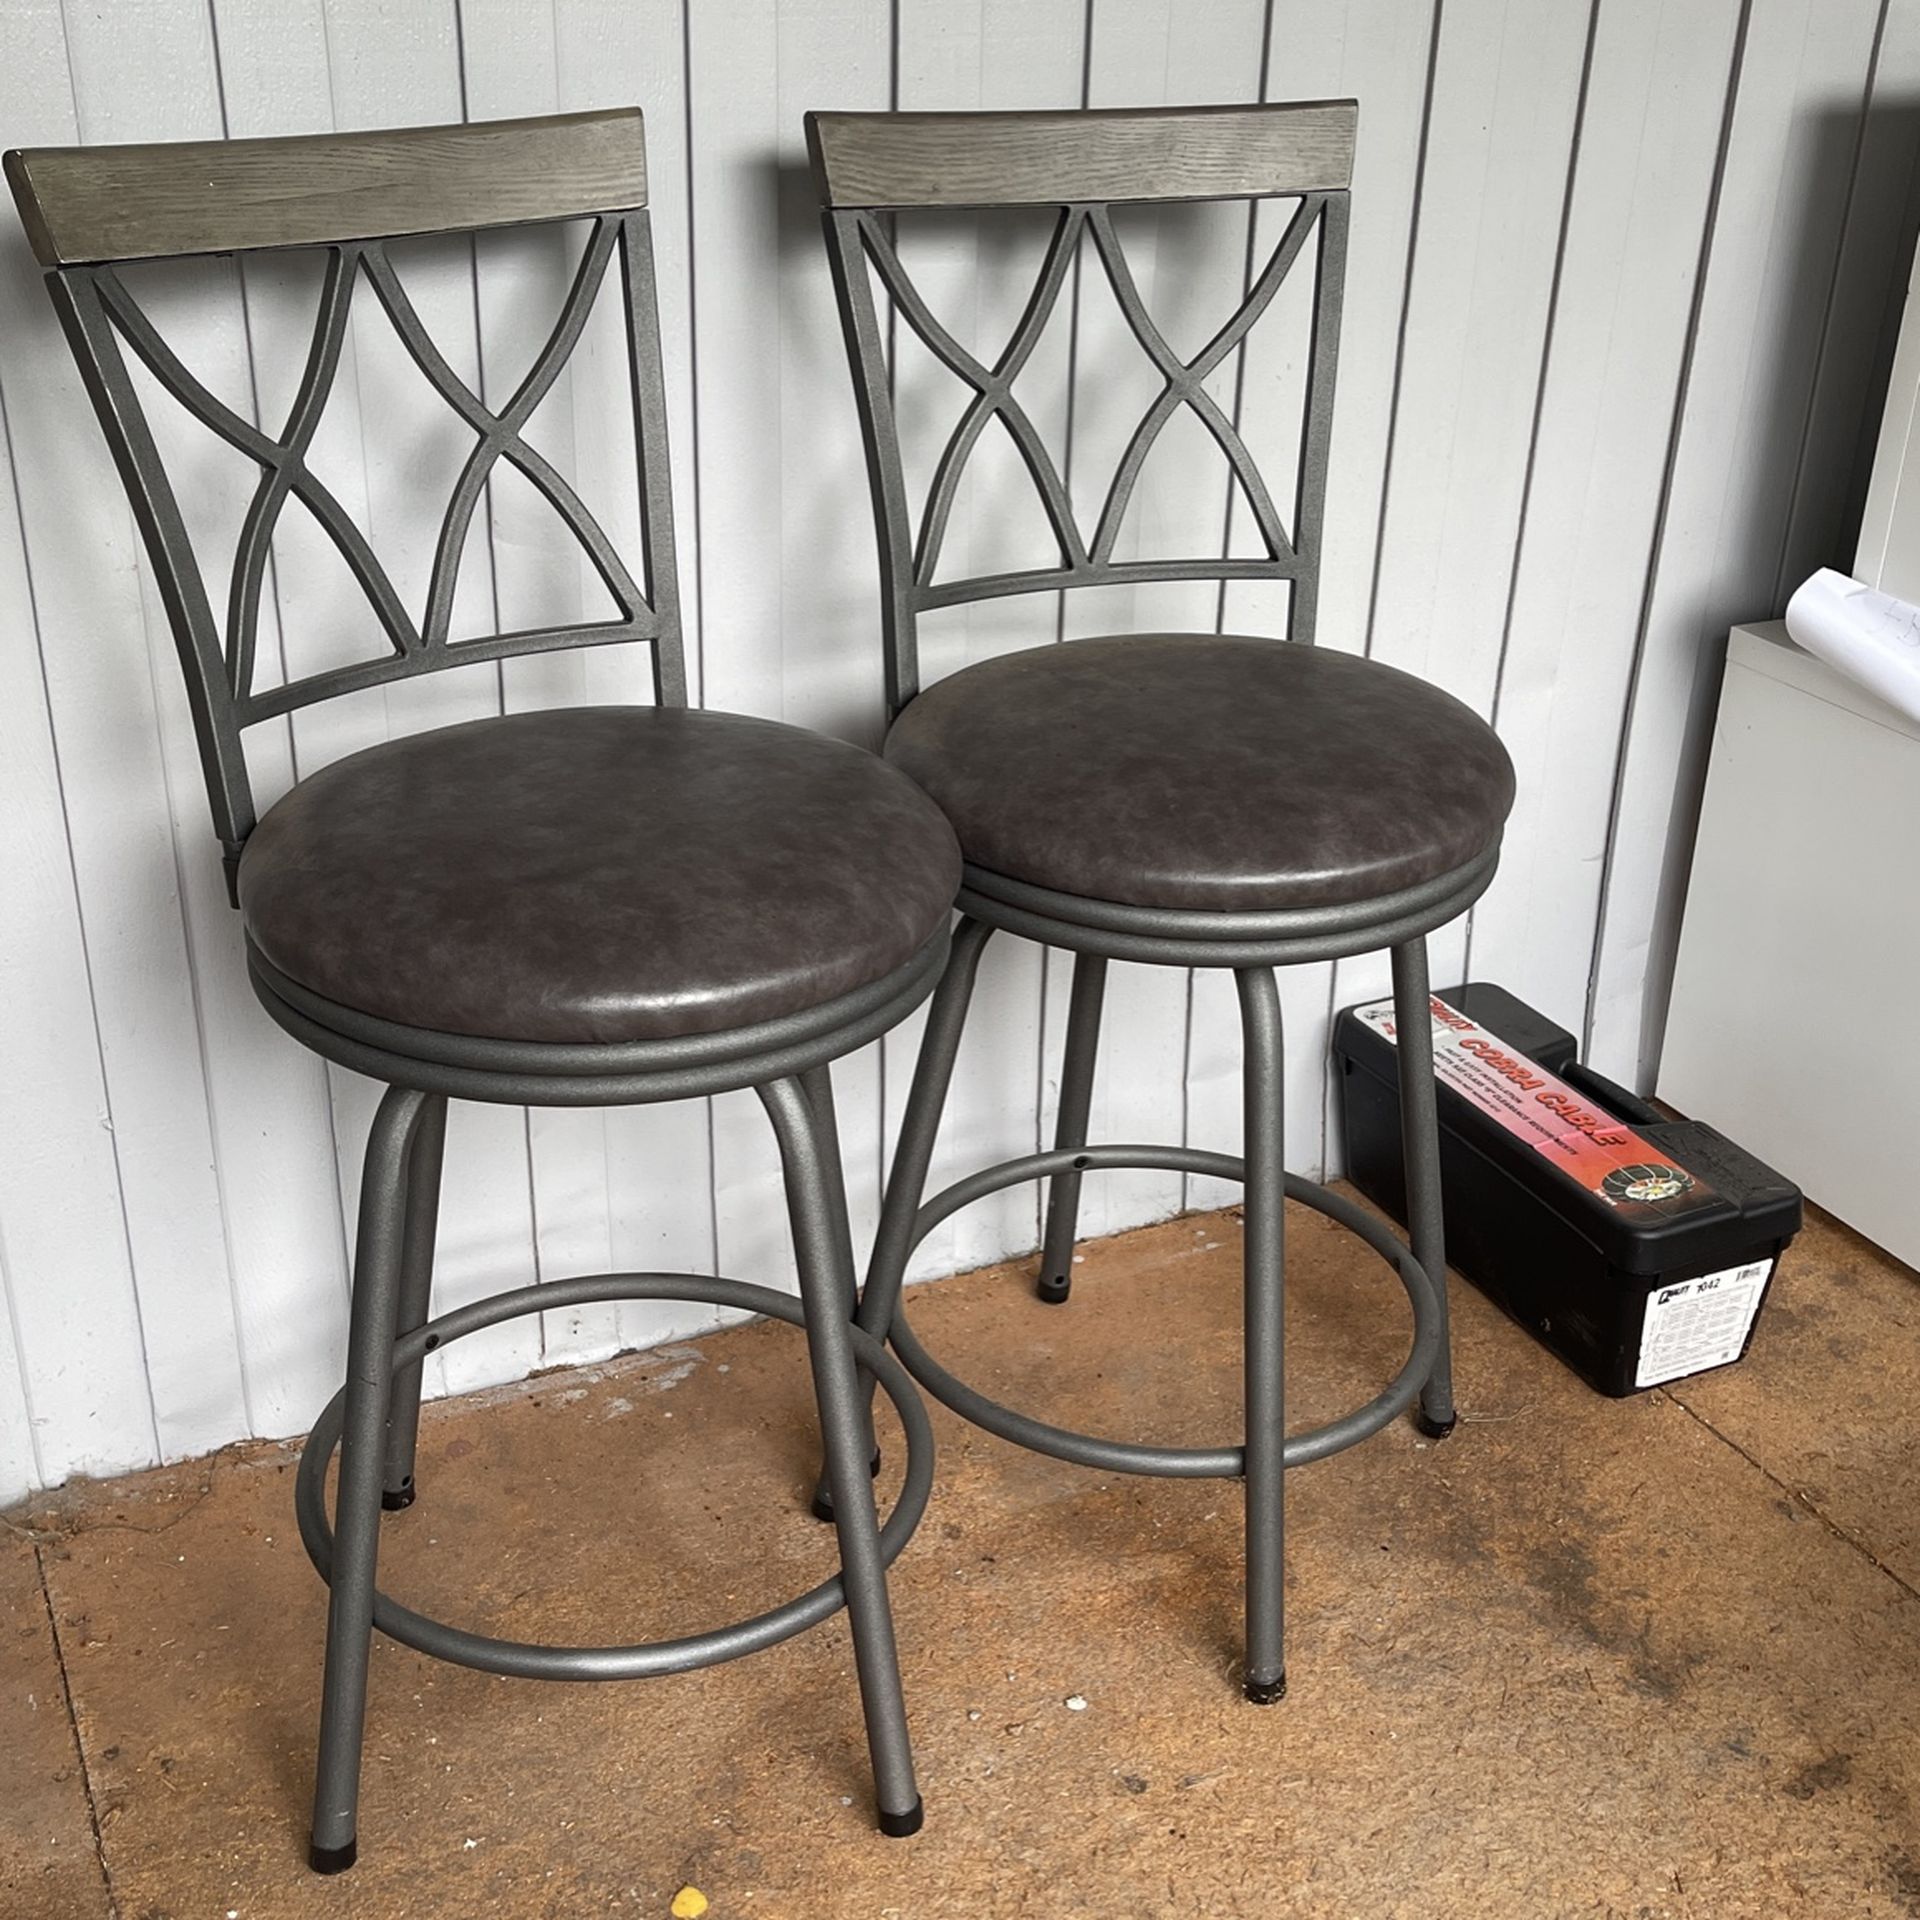 Two matching barstools